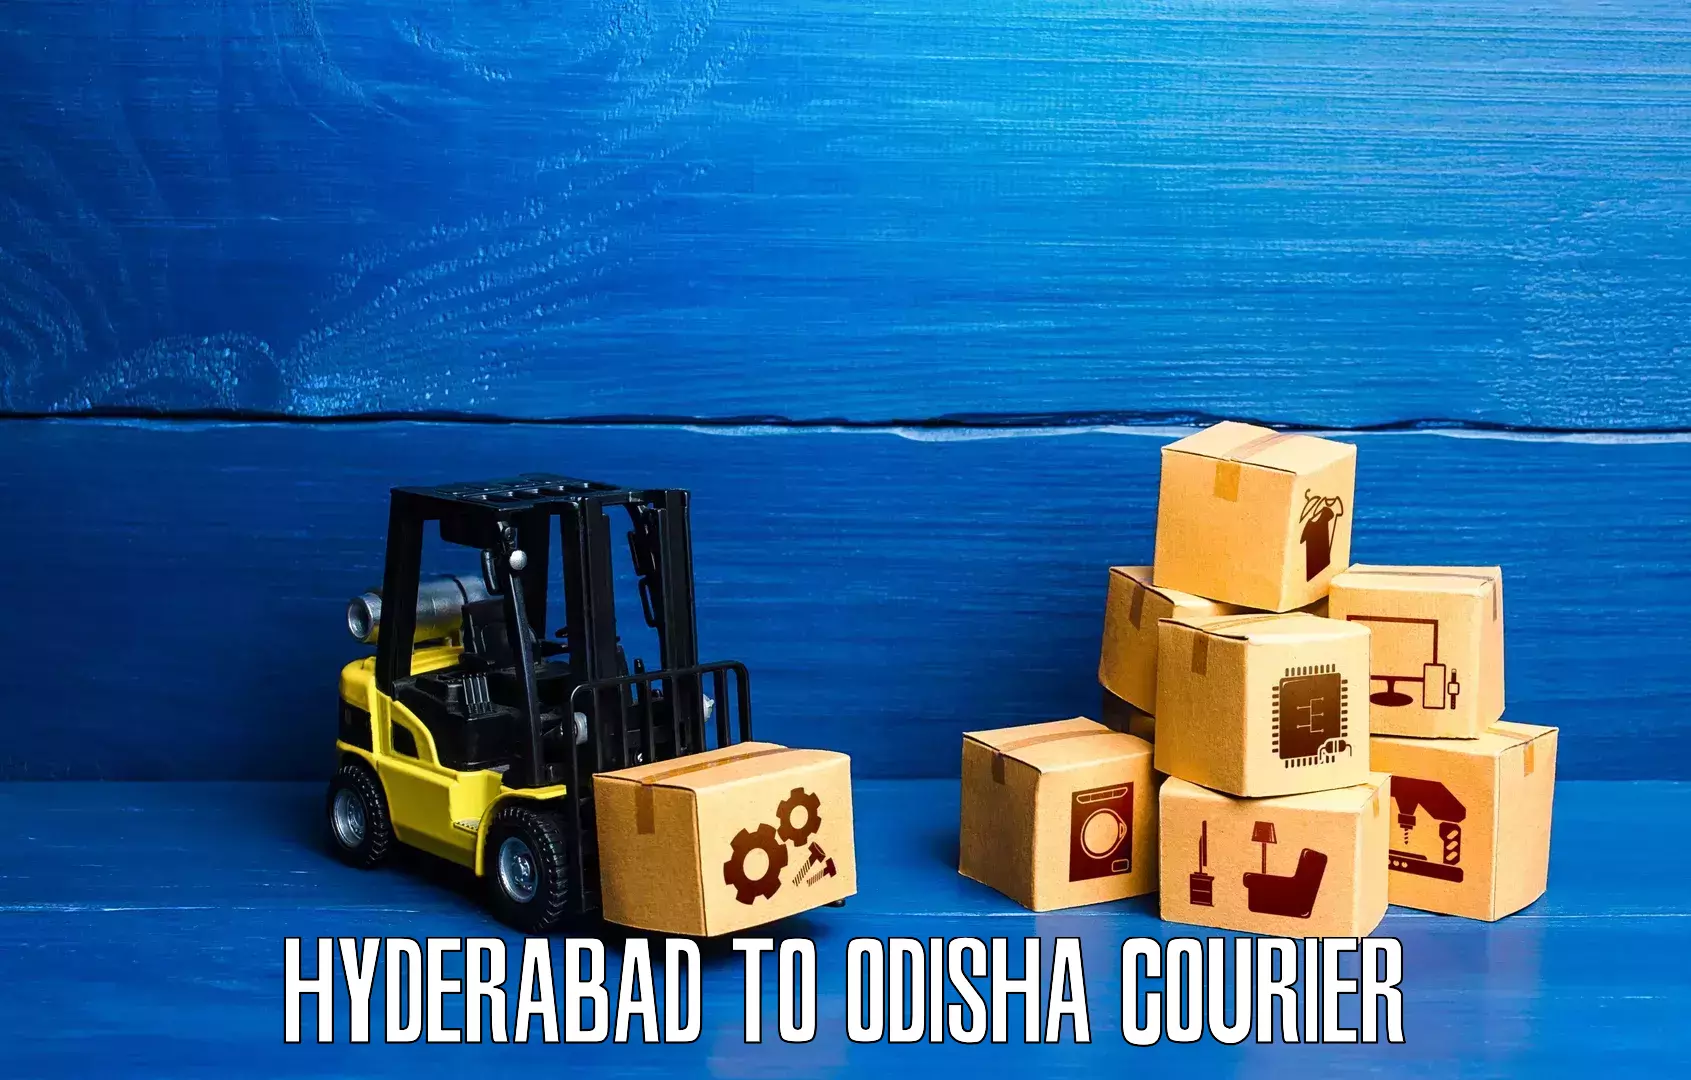 State-of-the-art courier technology Hyderabad to Dandisahi